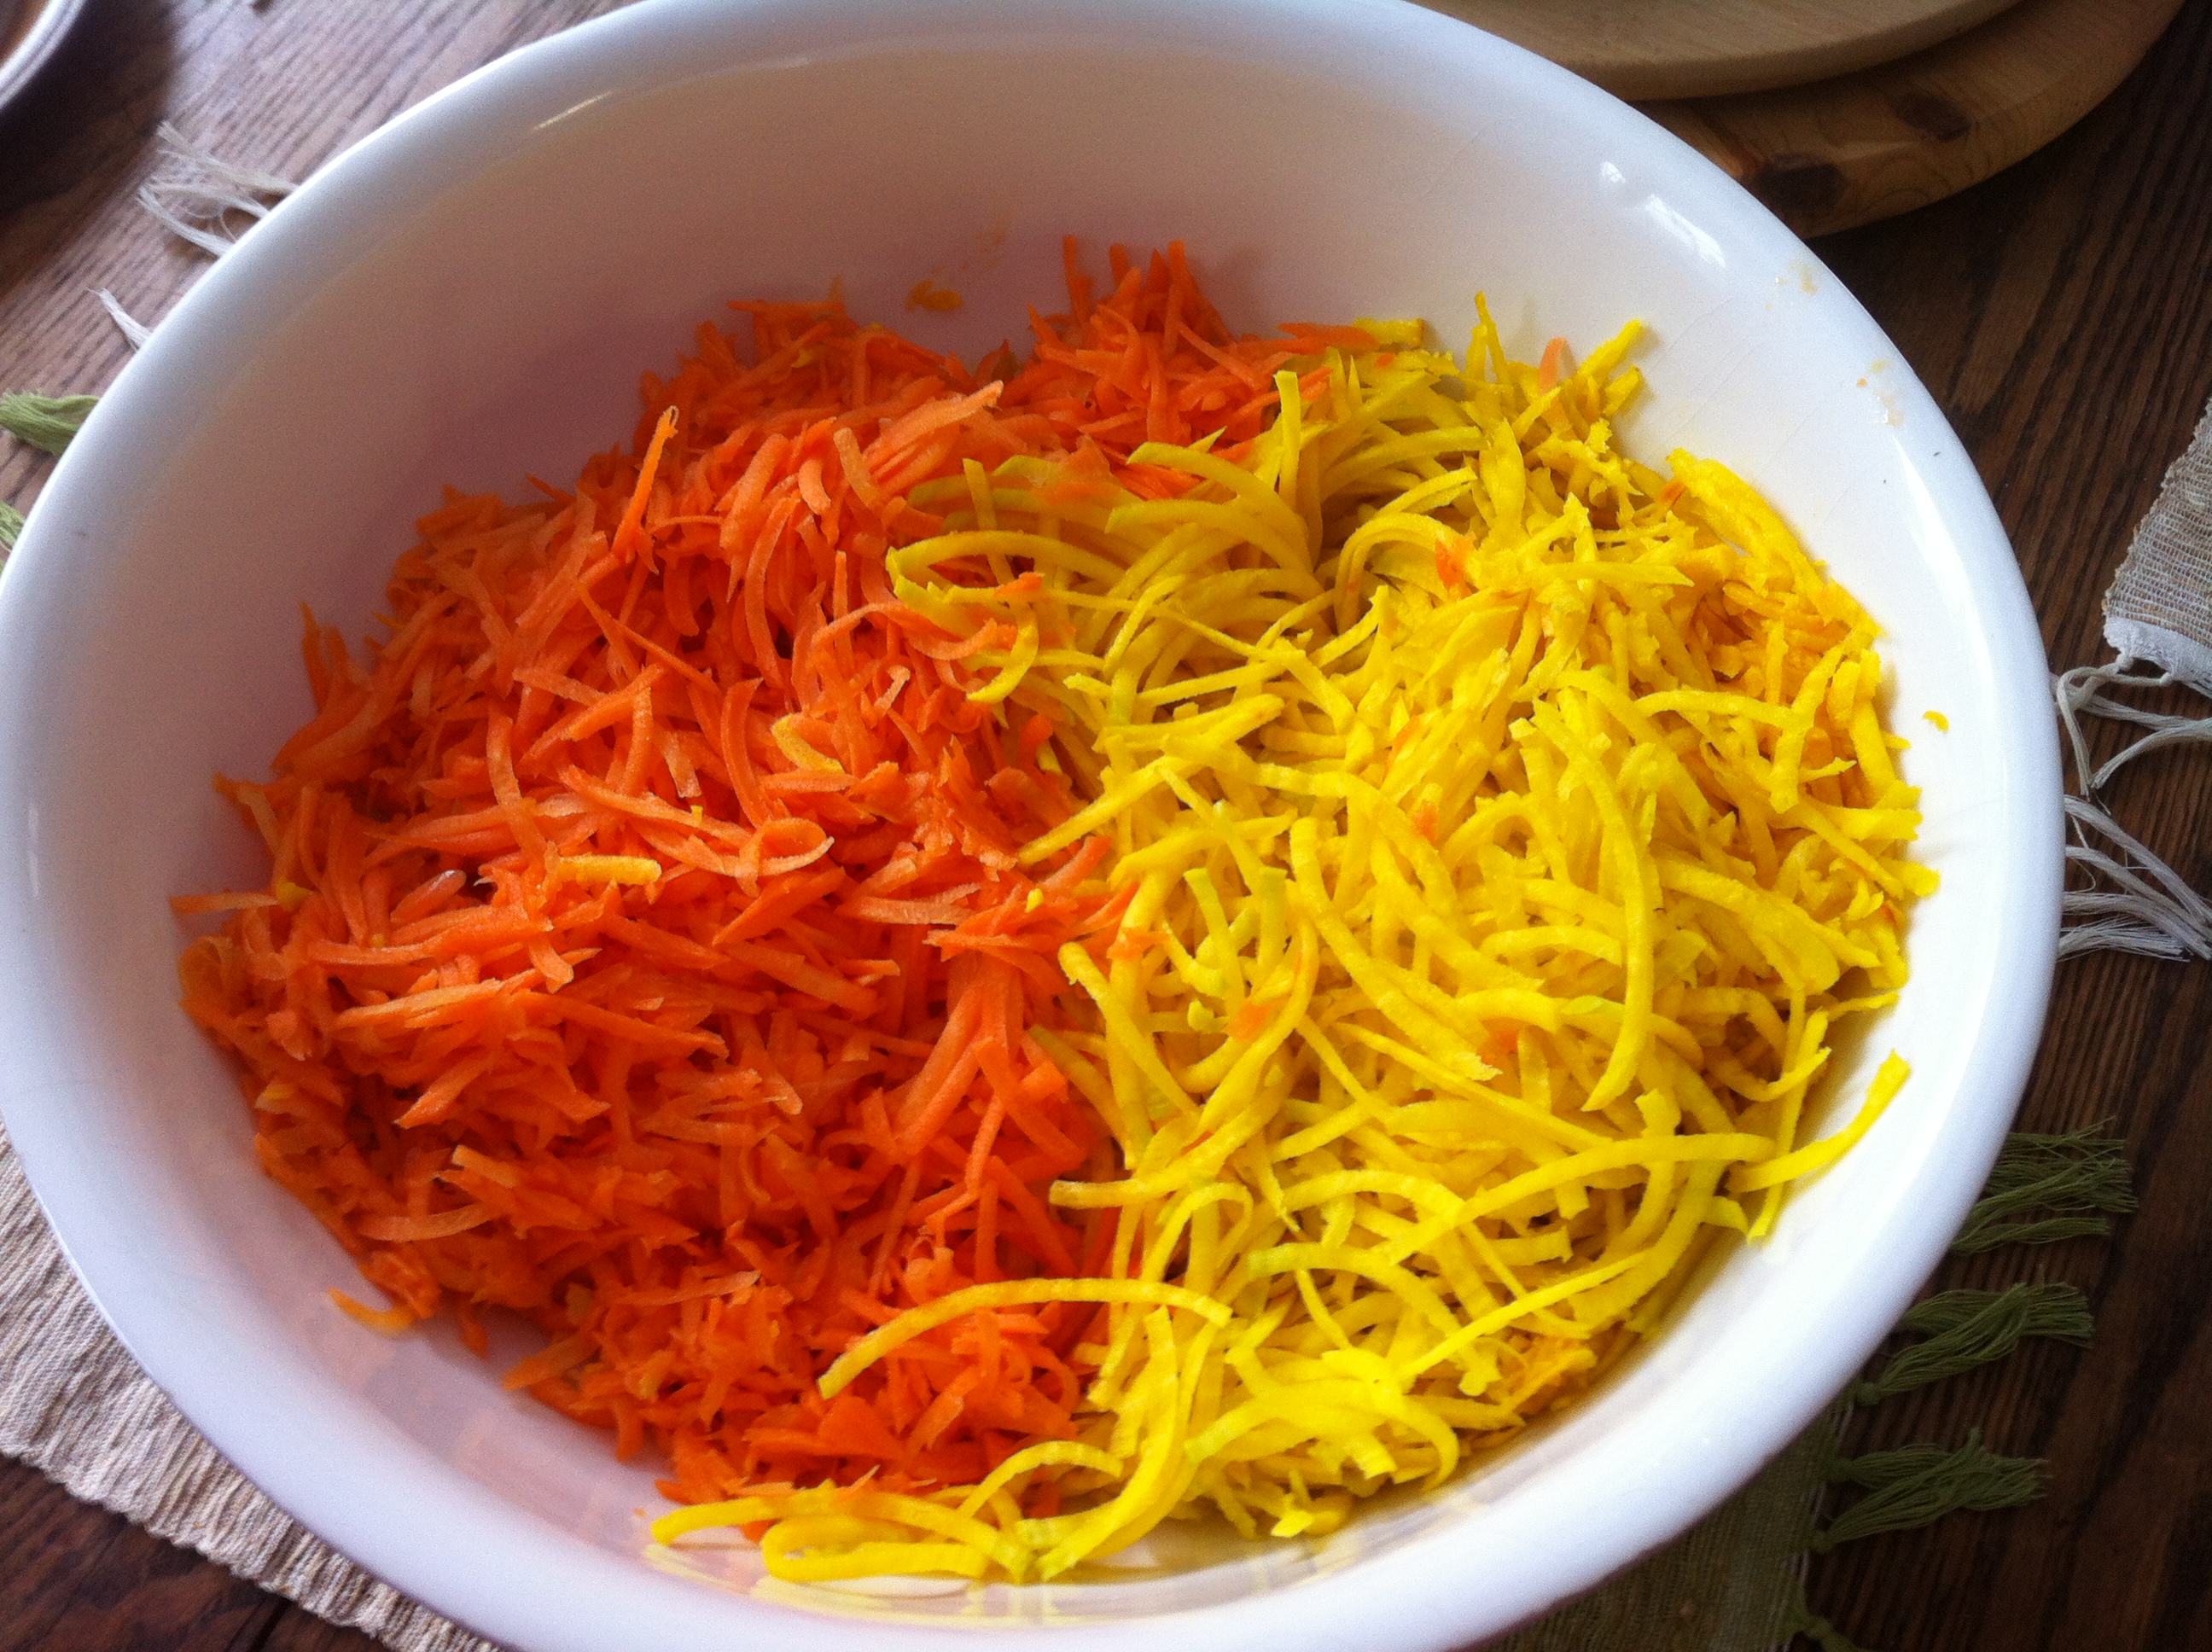 Shredded Carrot and Beet Salad with Fresh Thyme, a Fast Easy Way to Eat Healthy